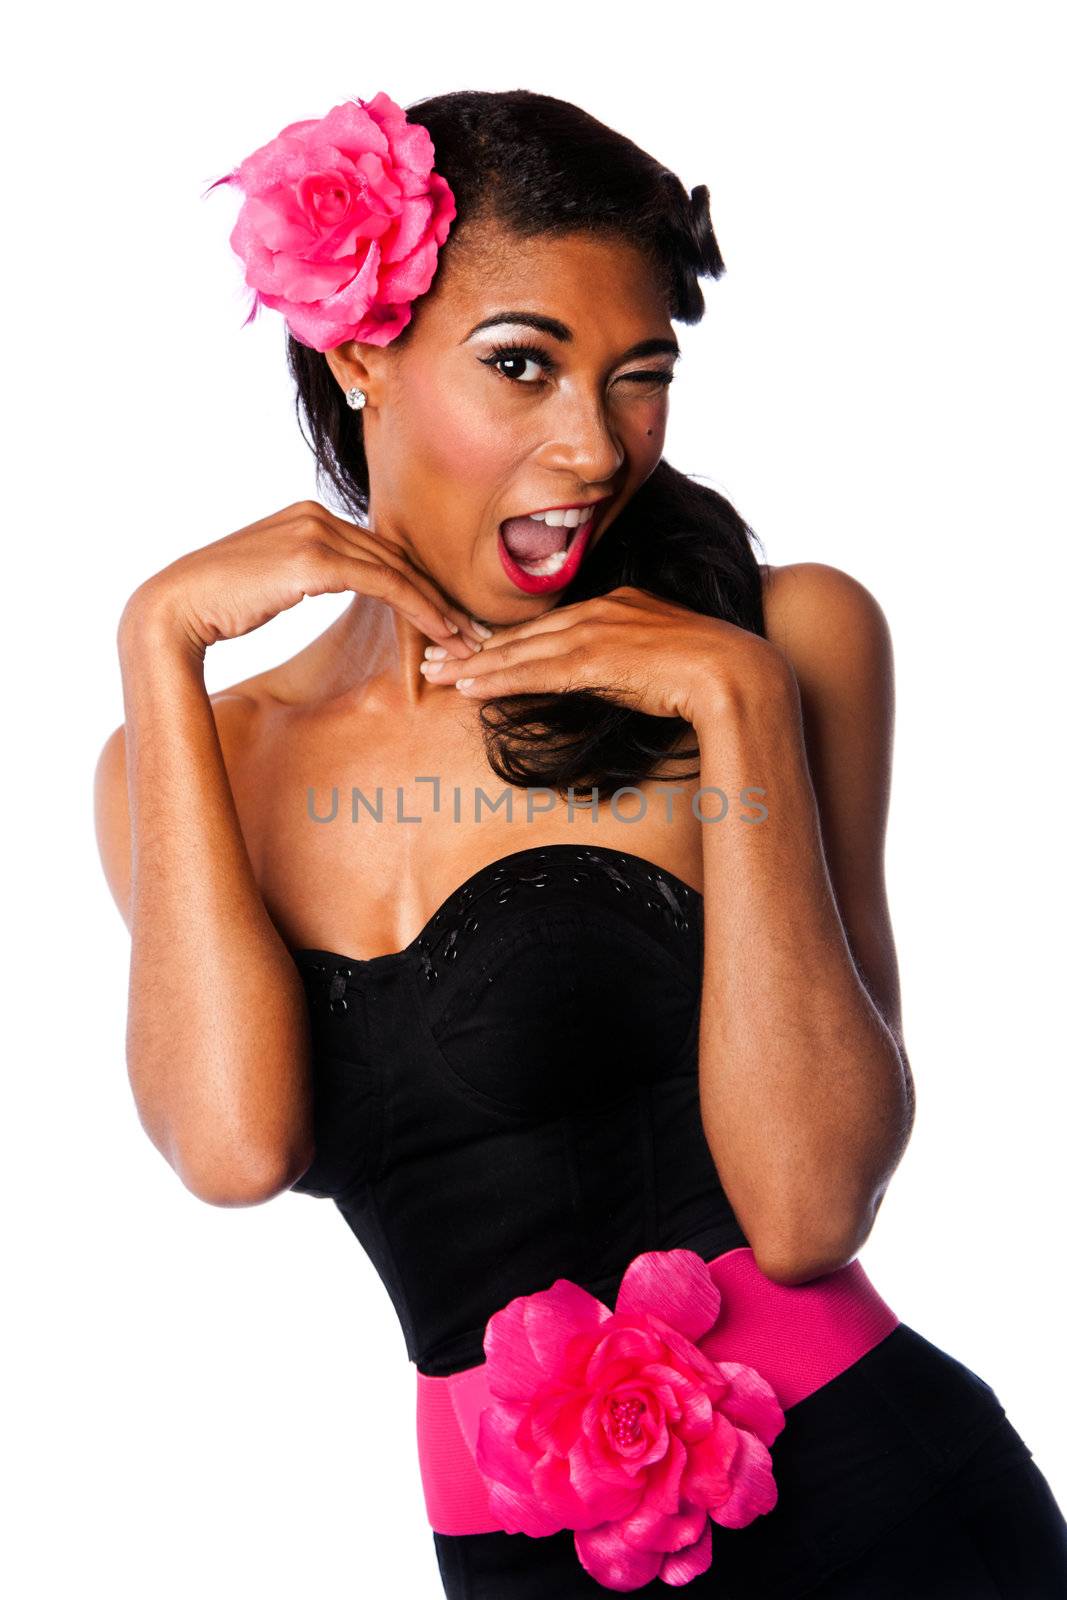 Beautiful pinup girl with pink flowers and black corset winking playfully, isolated.